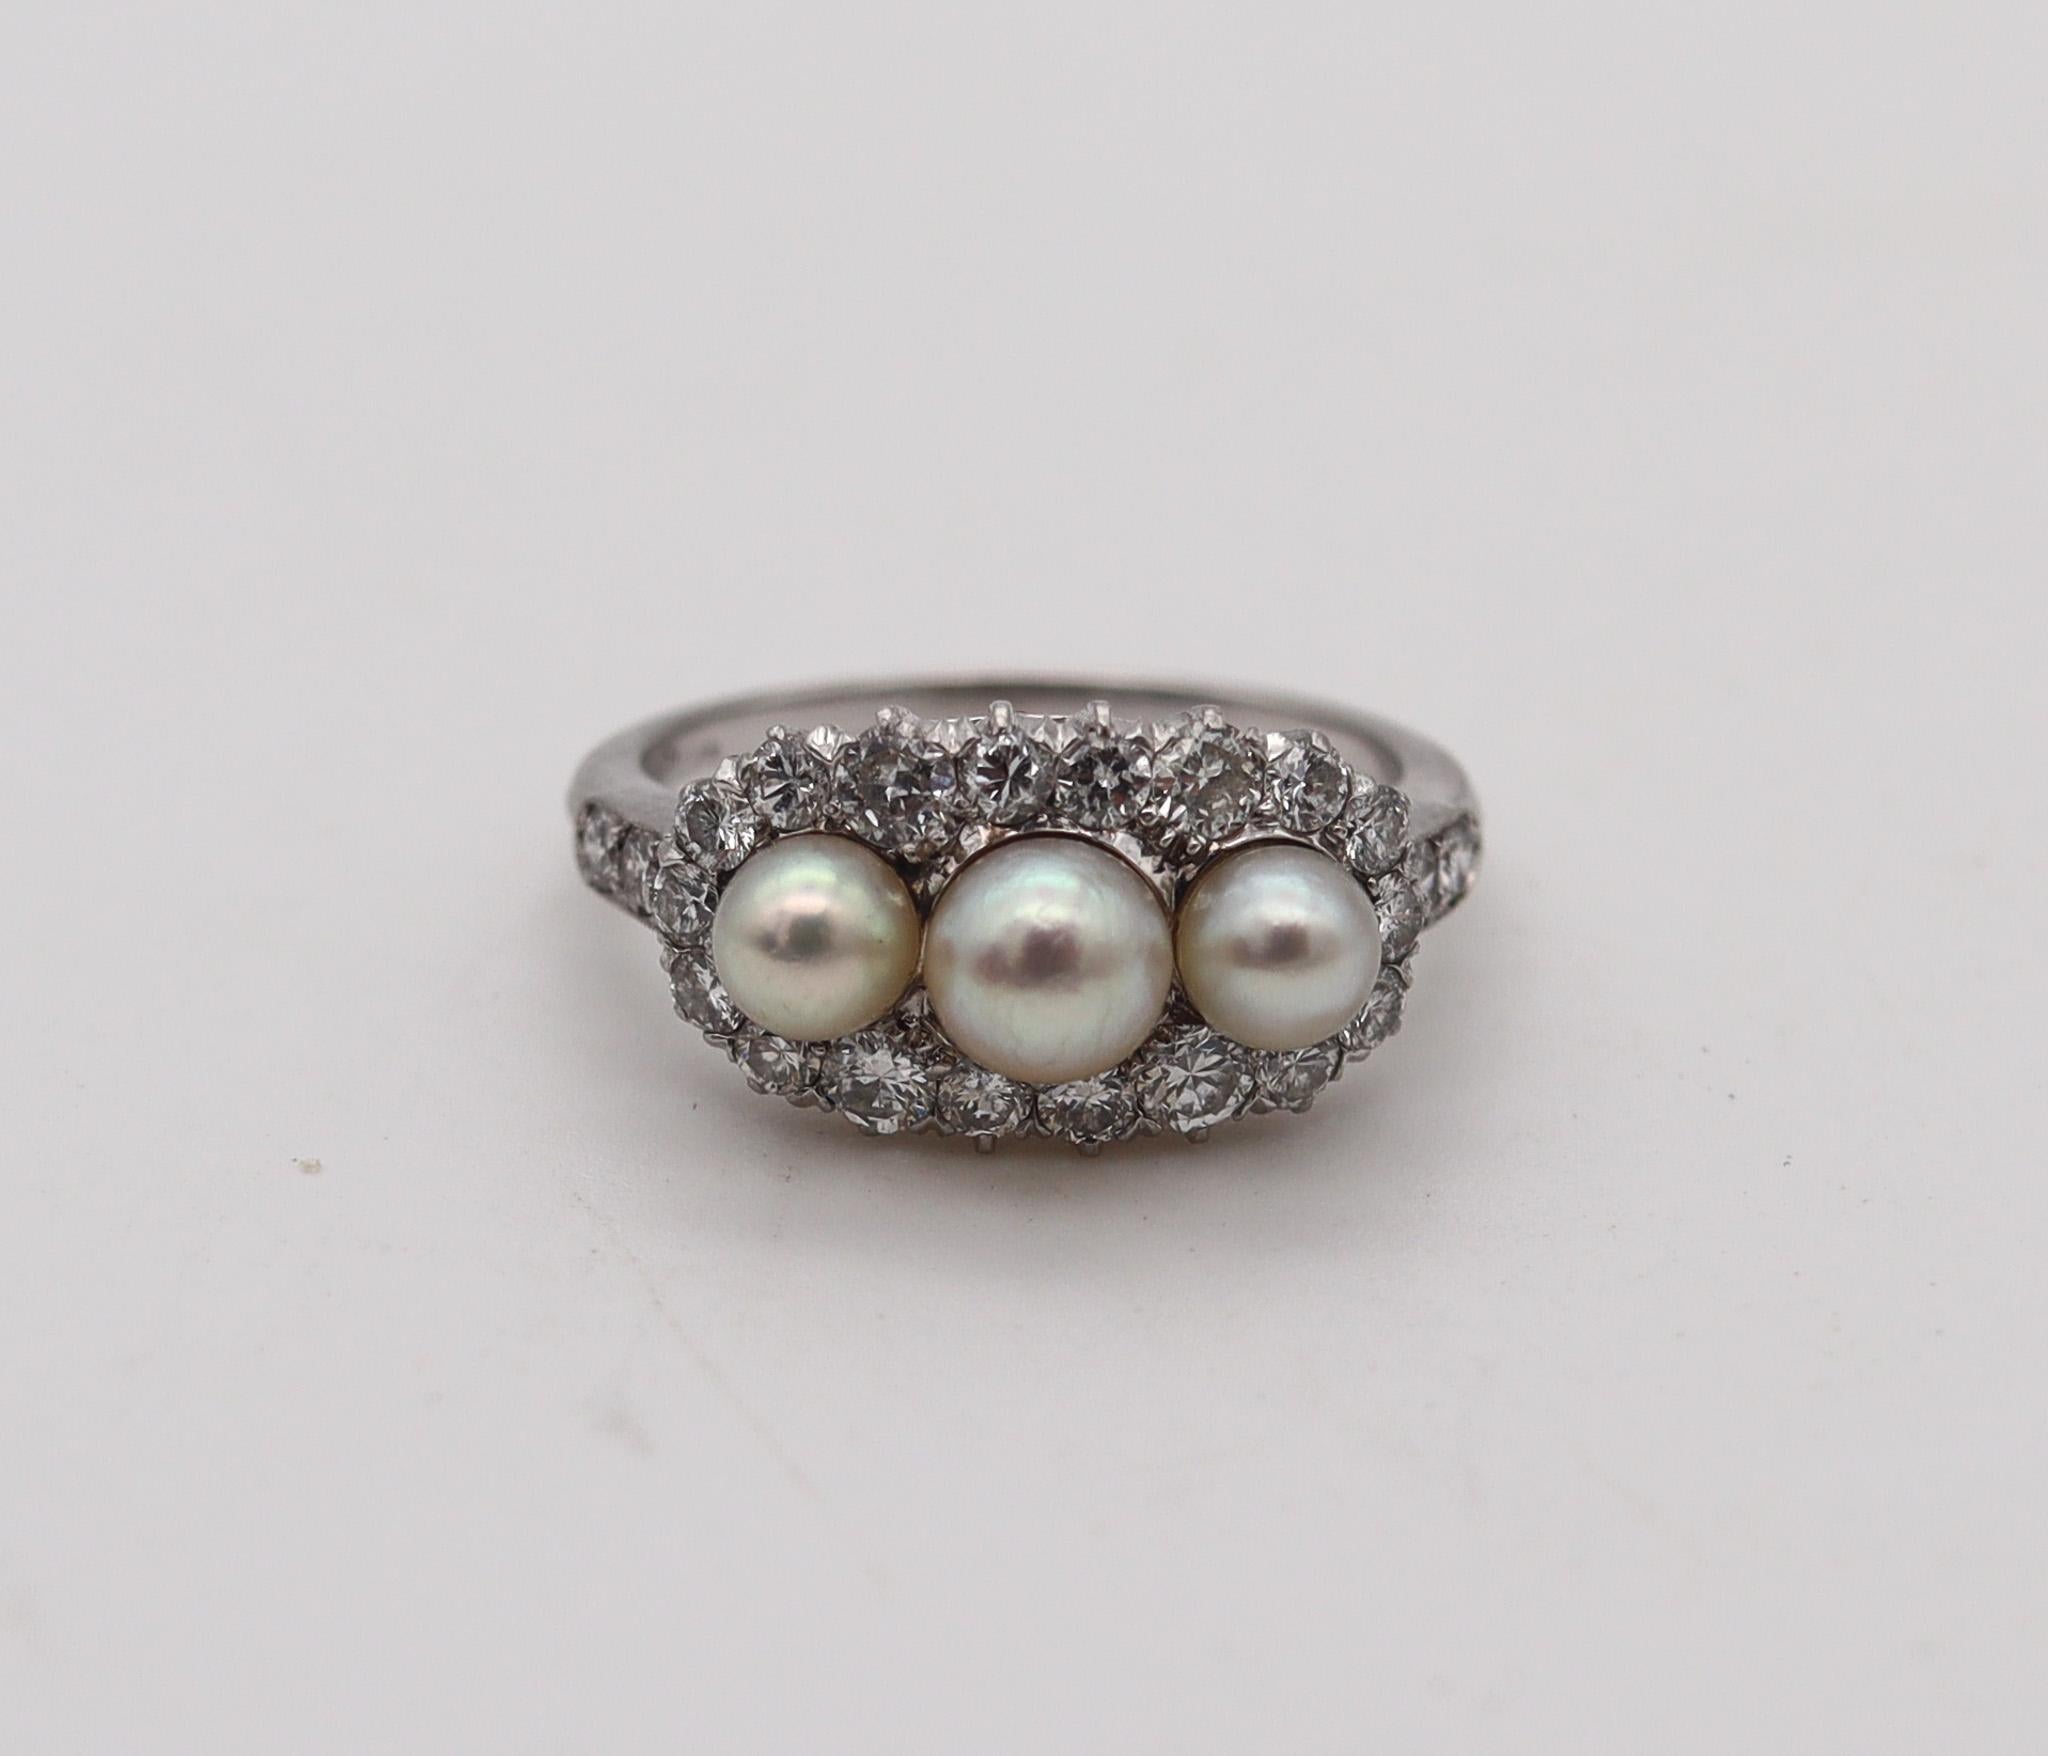 Tiffany & Co. 1910 Edwardian Ring In Platinum With 1.10 Ctw In Diamonds & Pearls In Excellent Condition For Sale In Miami, FL